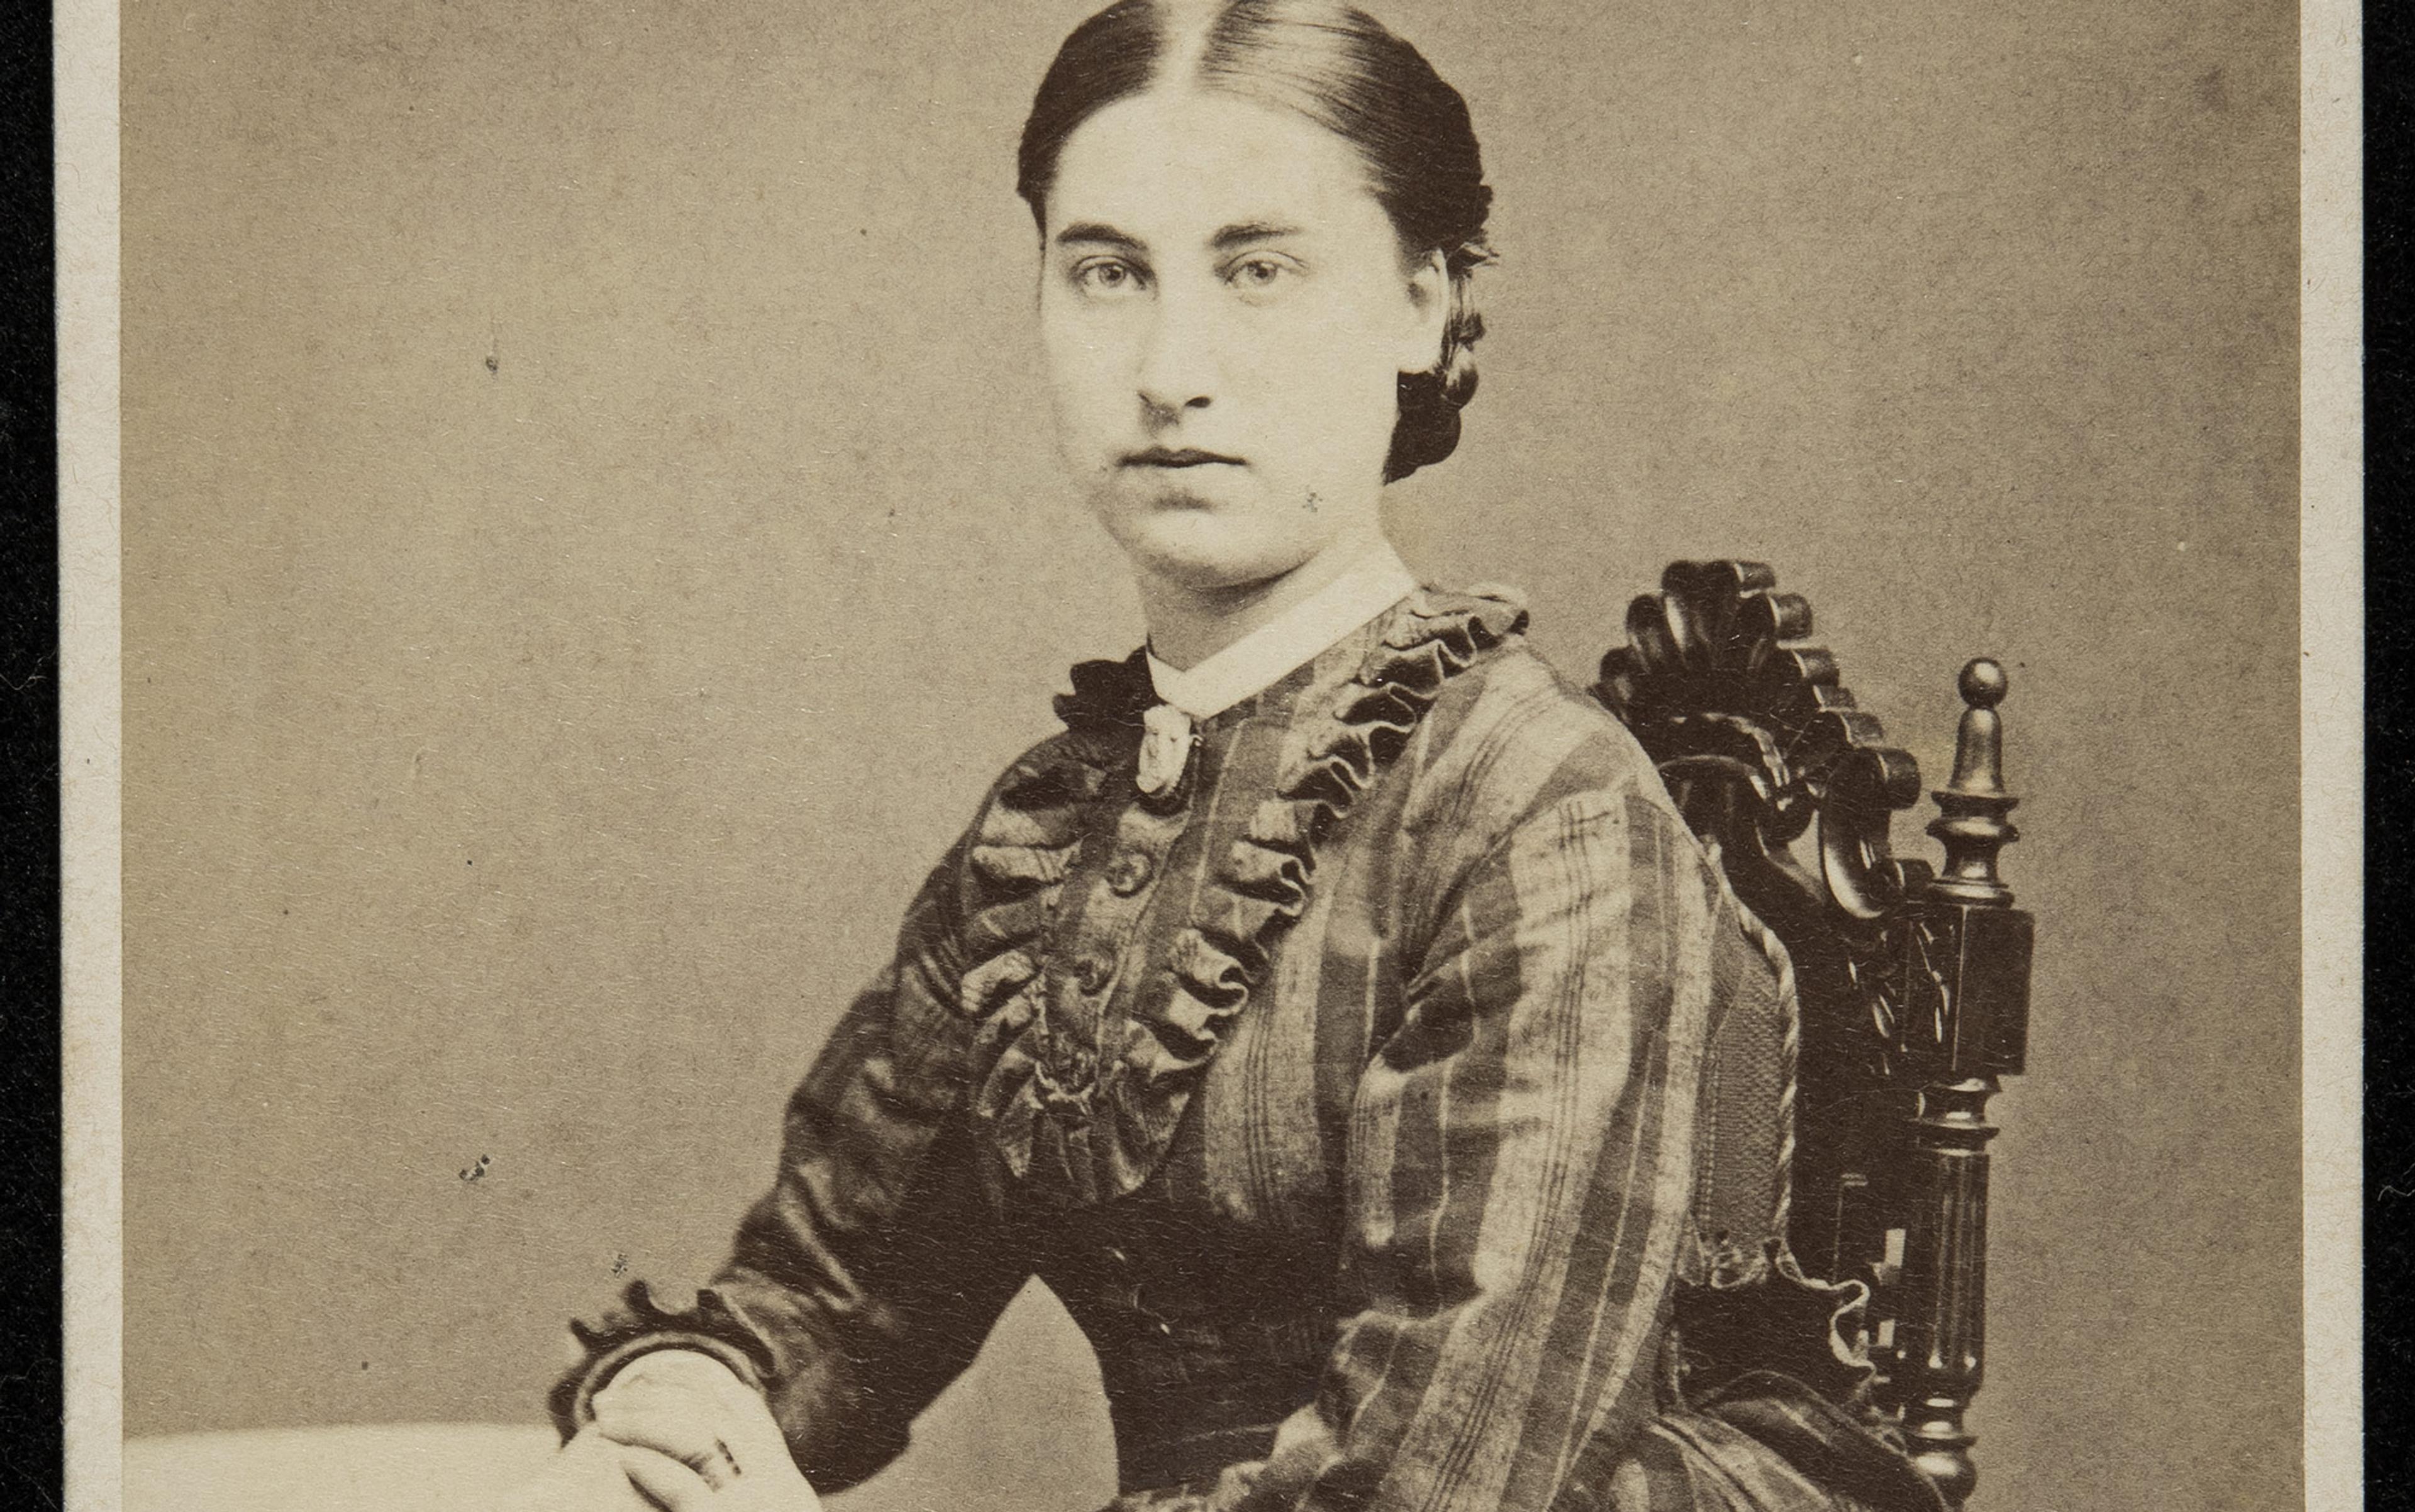 A sepia photograph of a woman from the 19th century, sitting on an ornate wooden chair, wearing a ruffled dress with buttons.